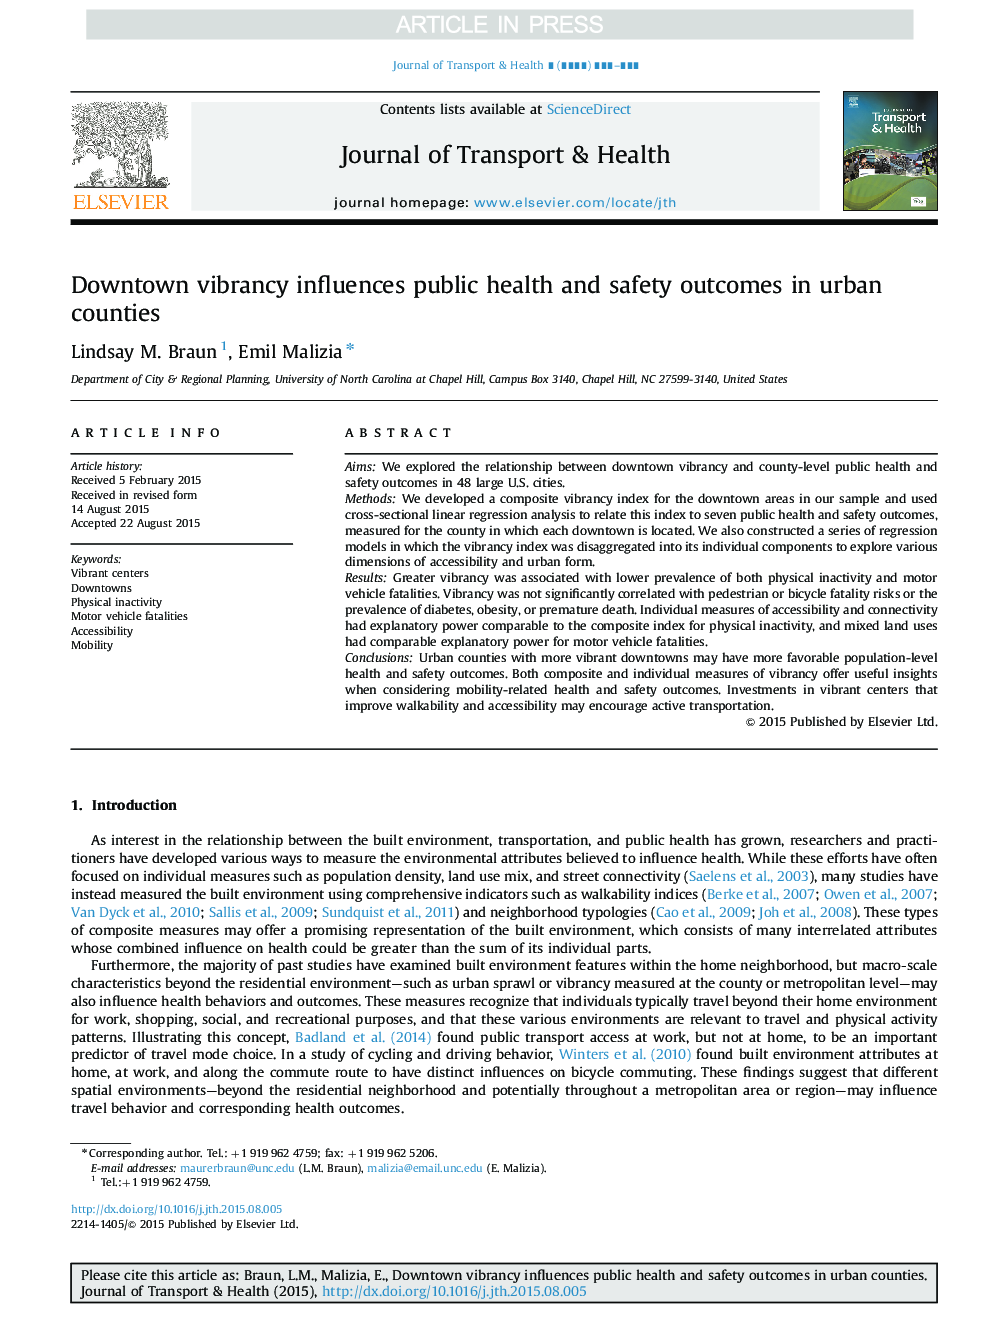 Downtown vibrancy influences public health and safety outcomes in urban counties